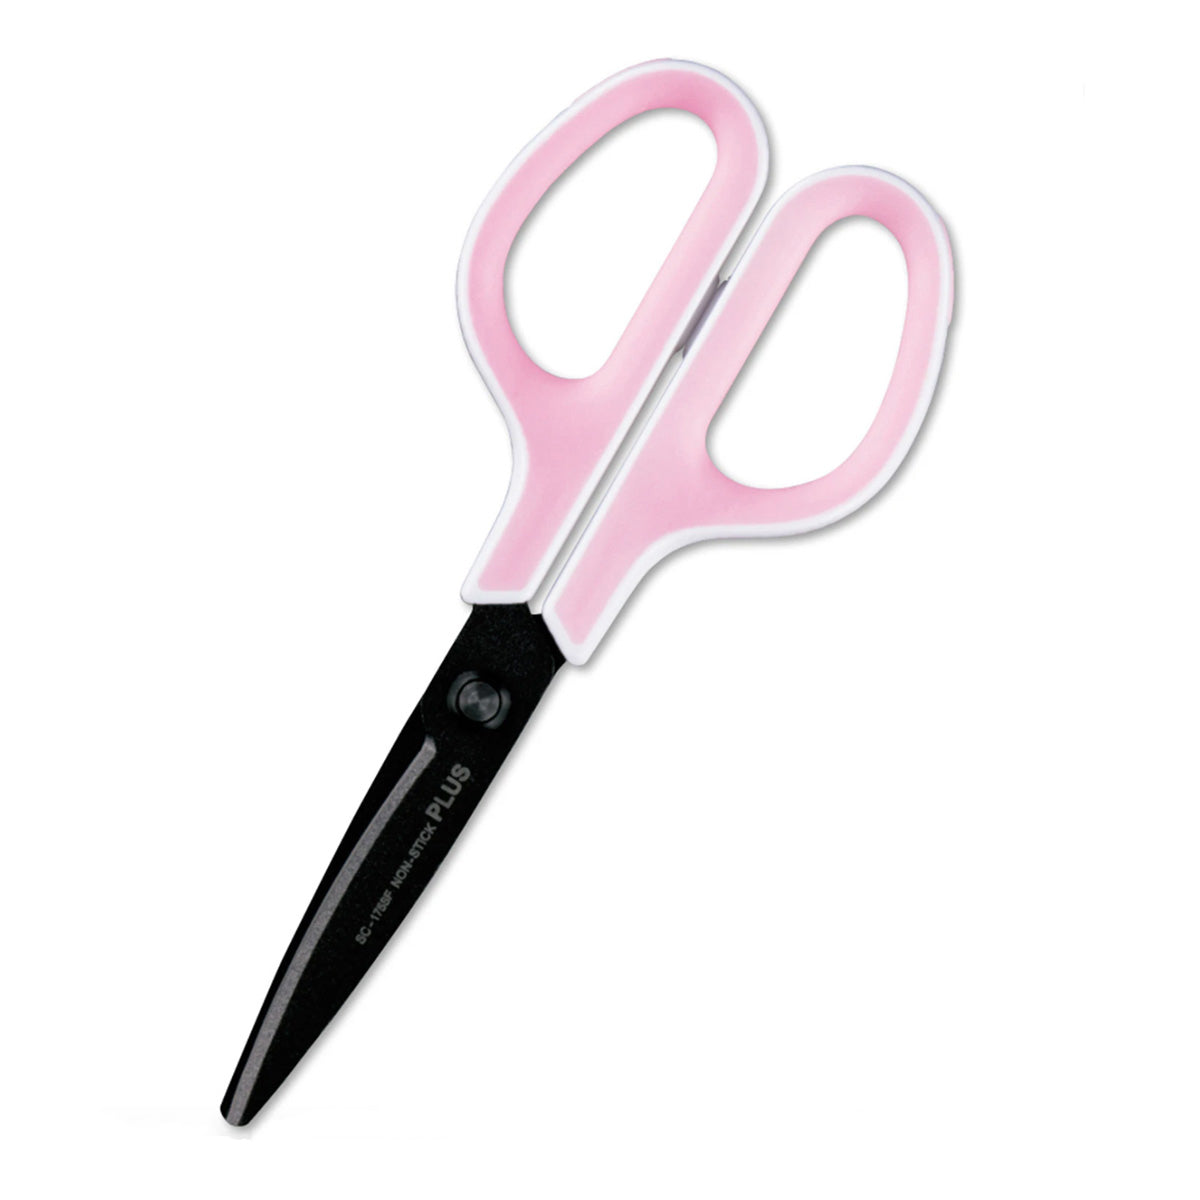 Canary Taper Scissors for Office, Gray [Fluorine Coat] (EP-175F)